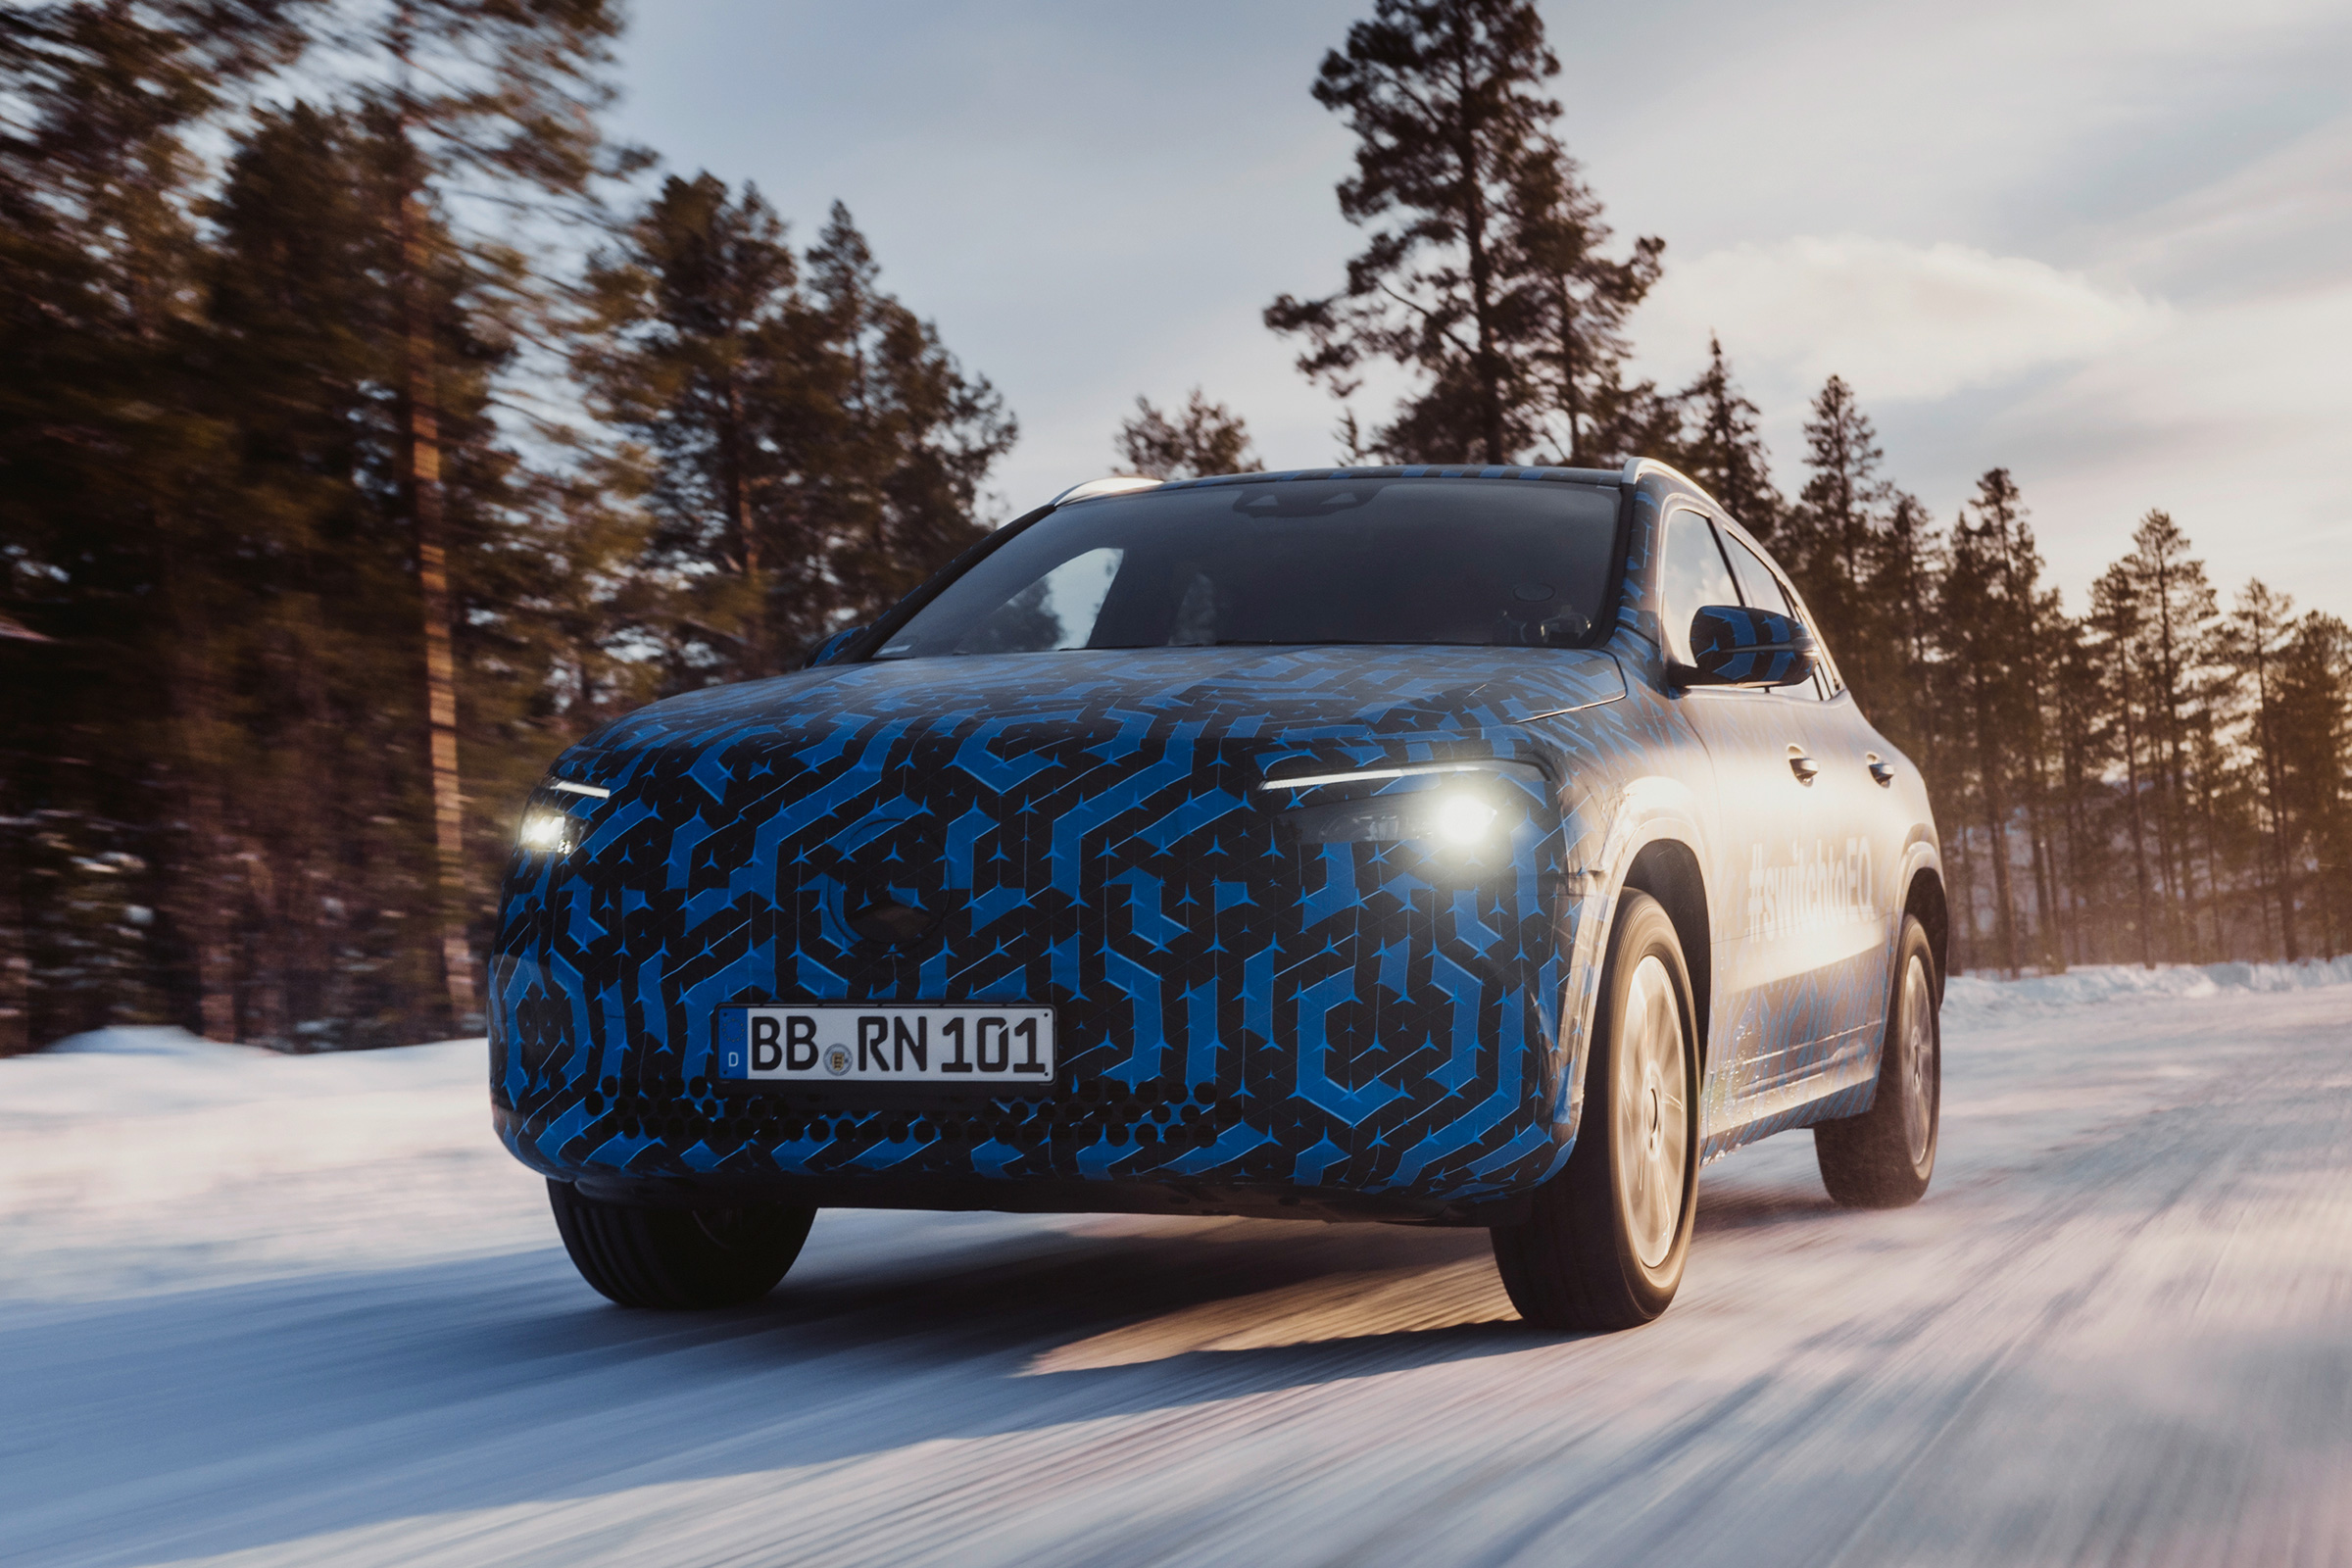 New 2020 Mercedes EQA teased while undergoing arctic 